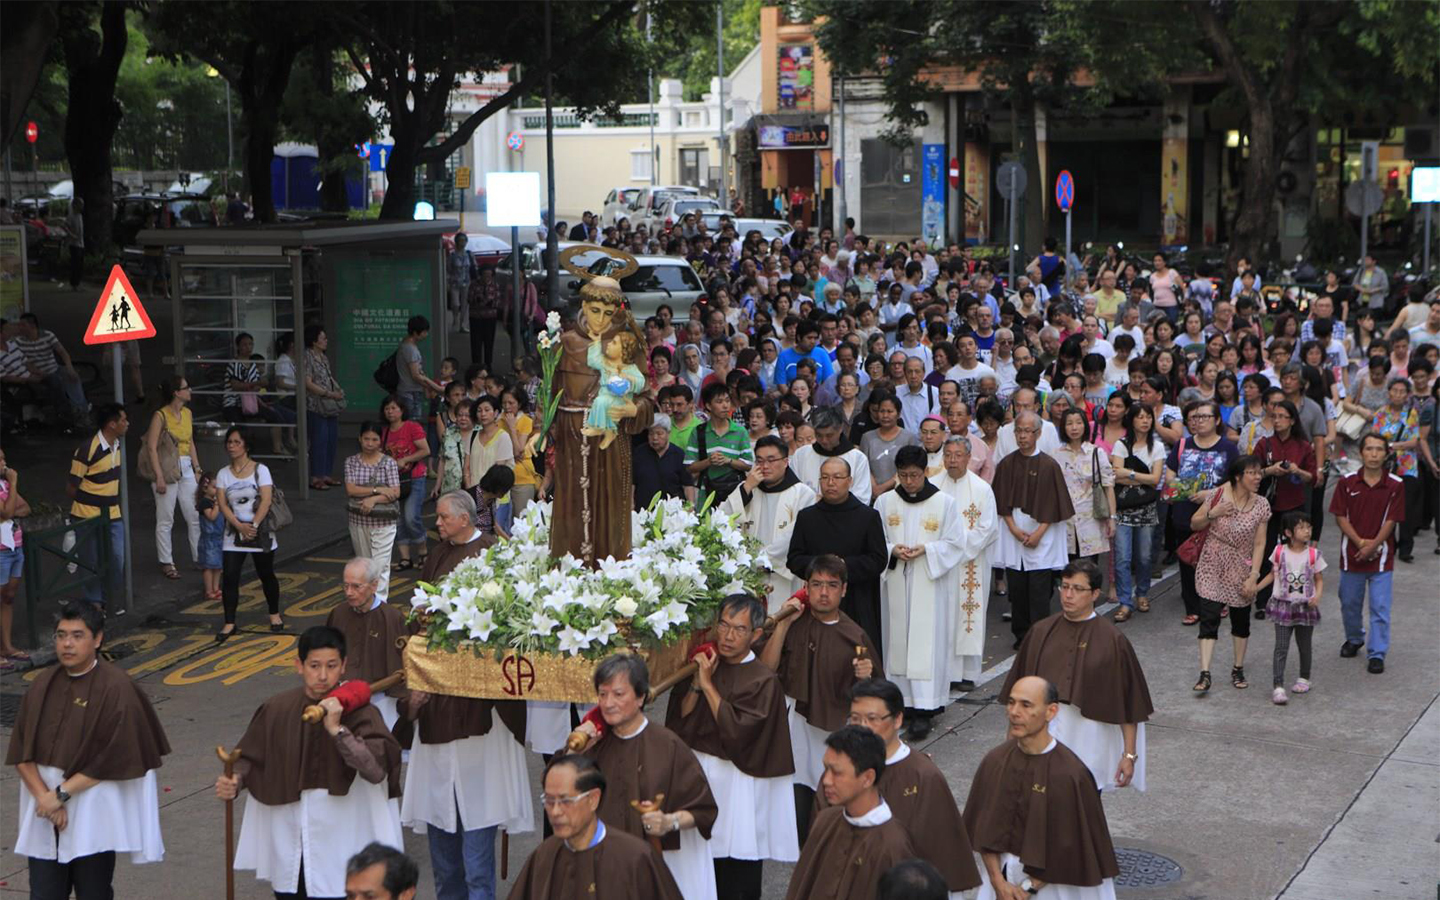 The Procession of Saint Anthony